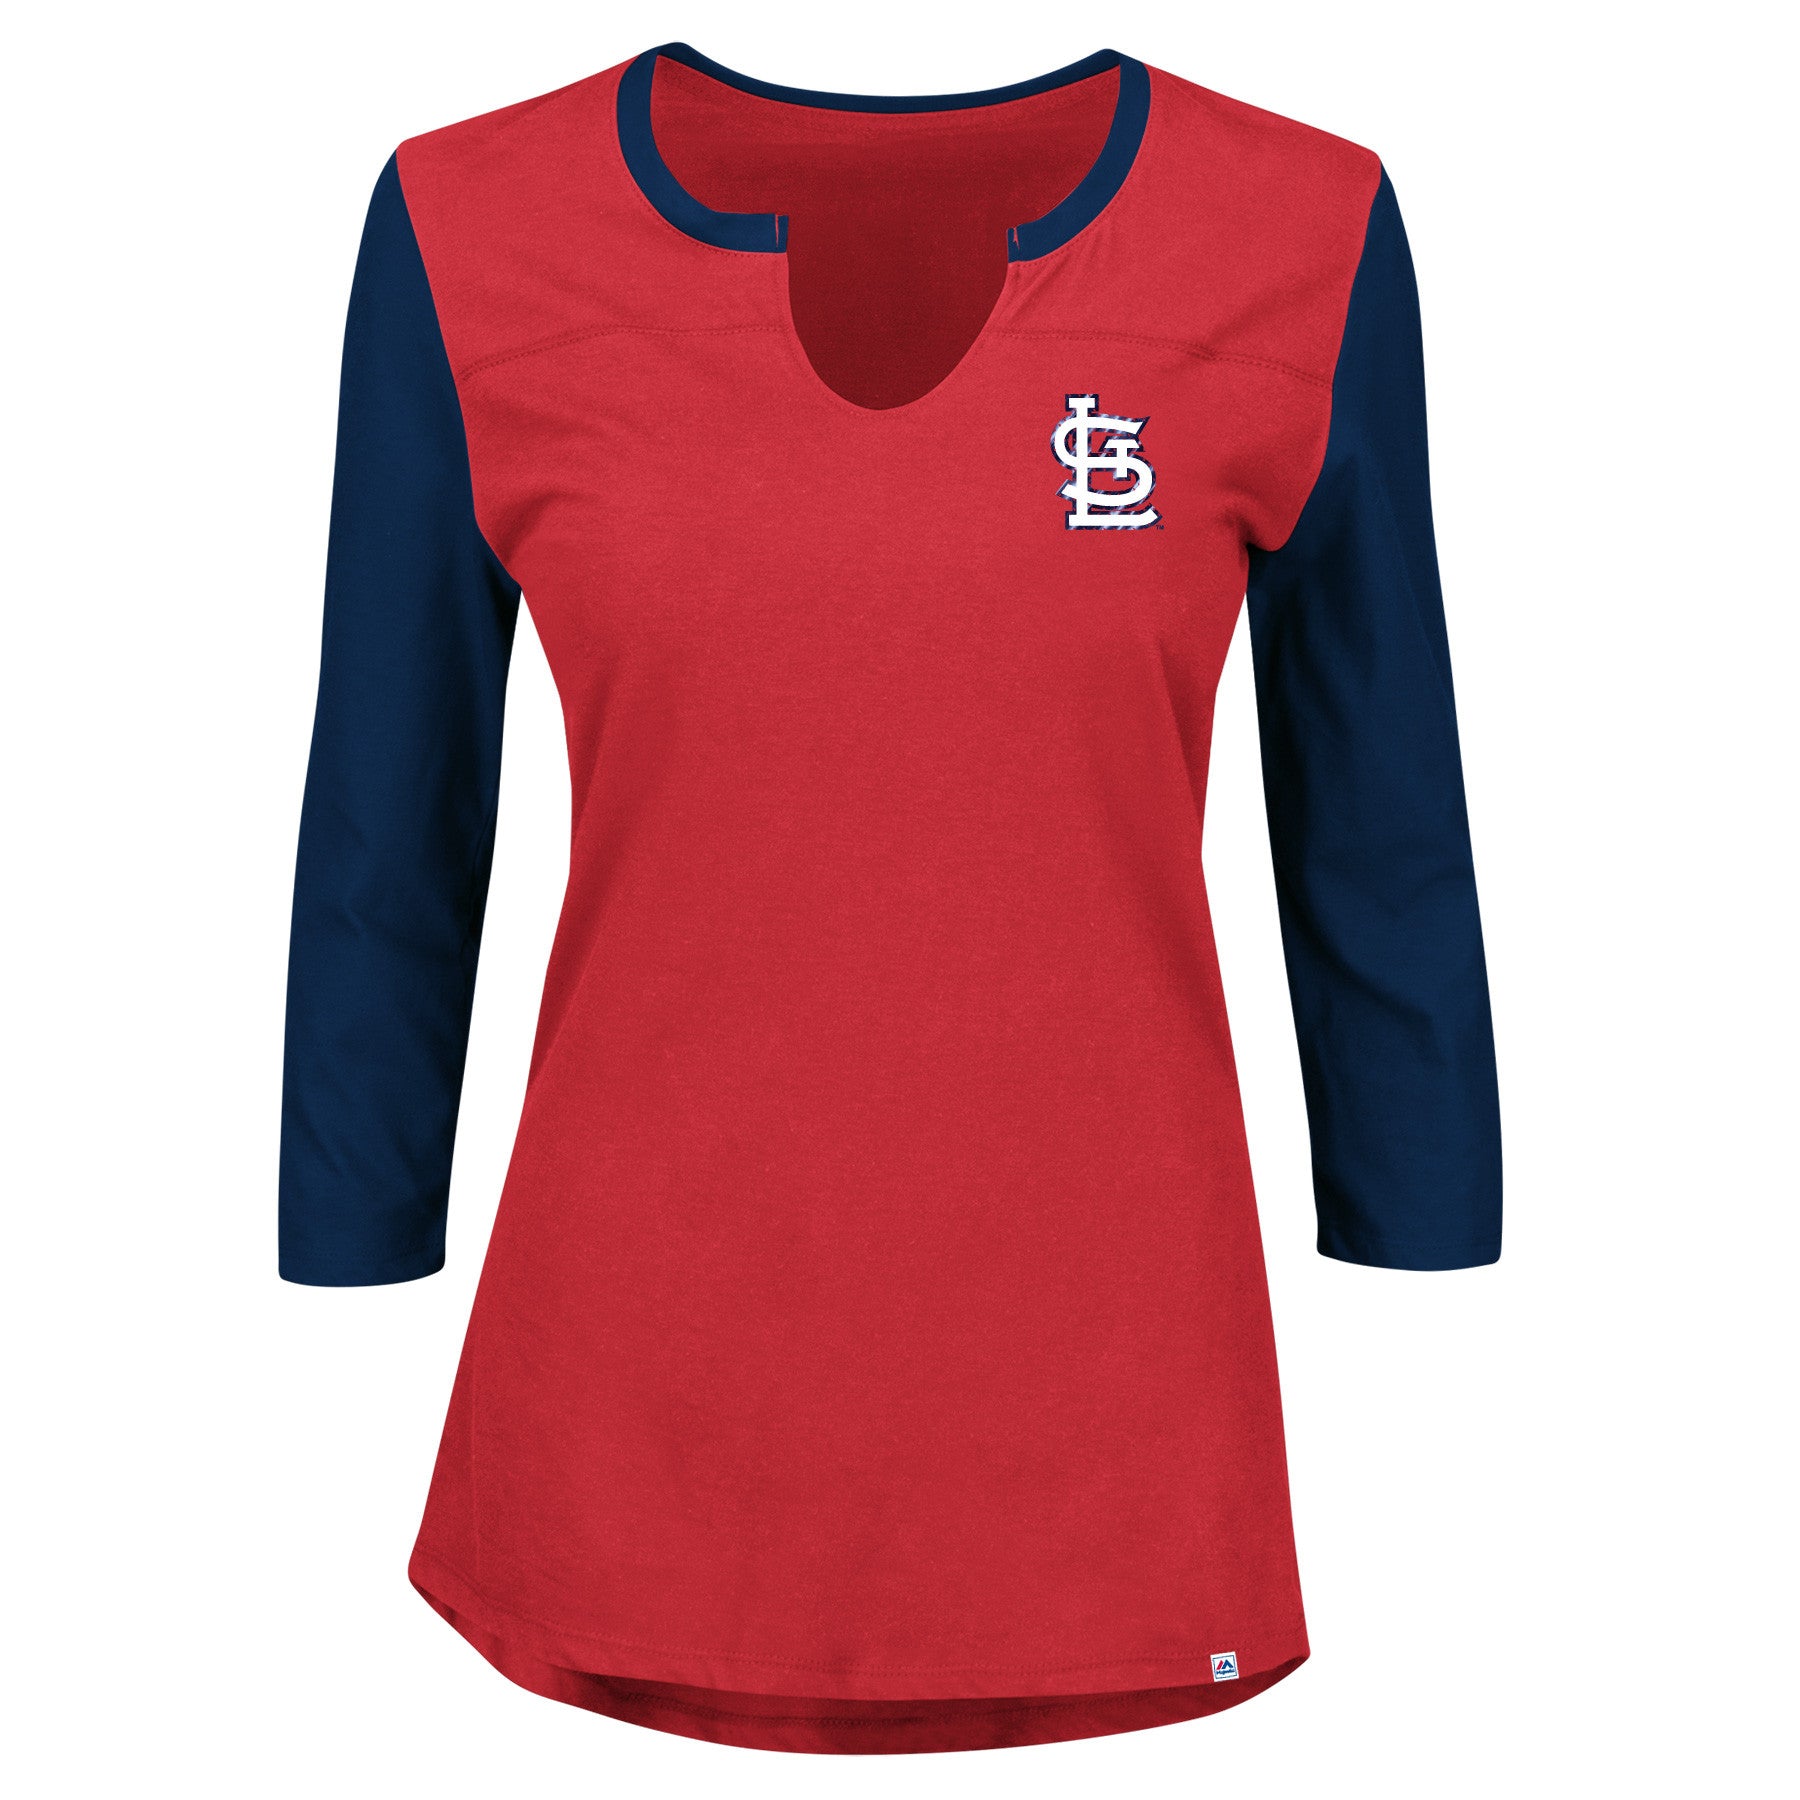 St. Louis Cardinals Ladies Above Average 3/4 Sleeve T-Shirt by